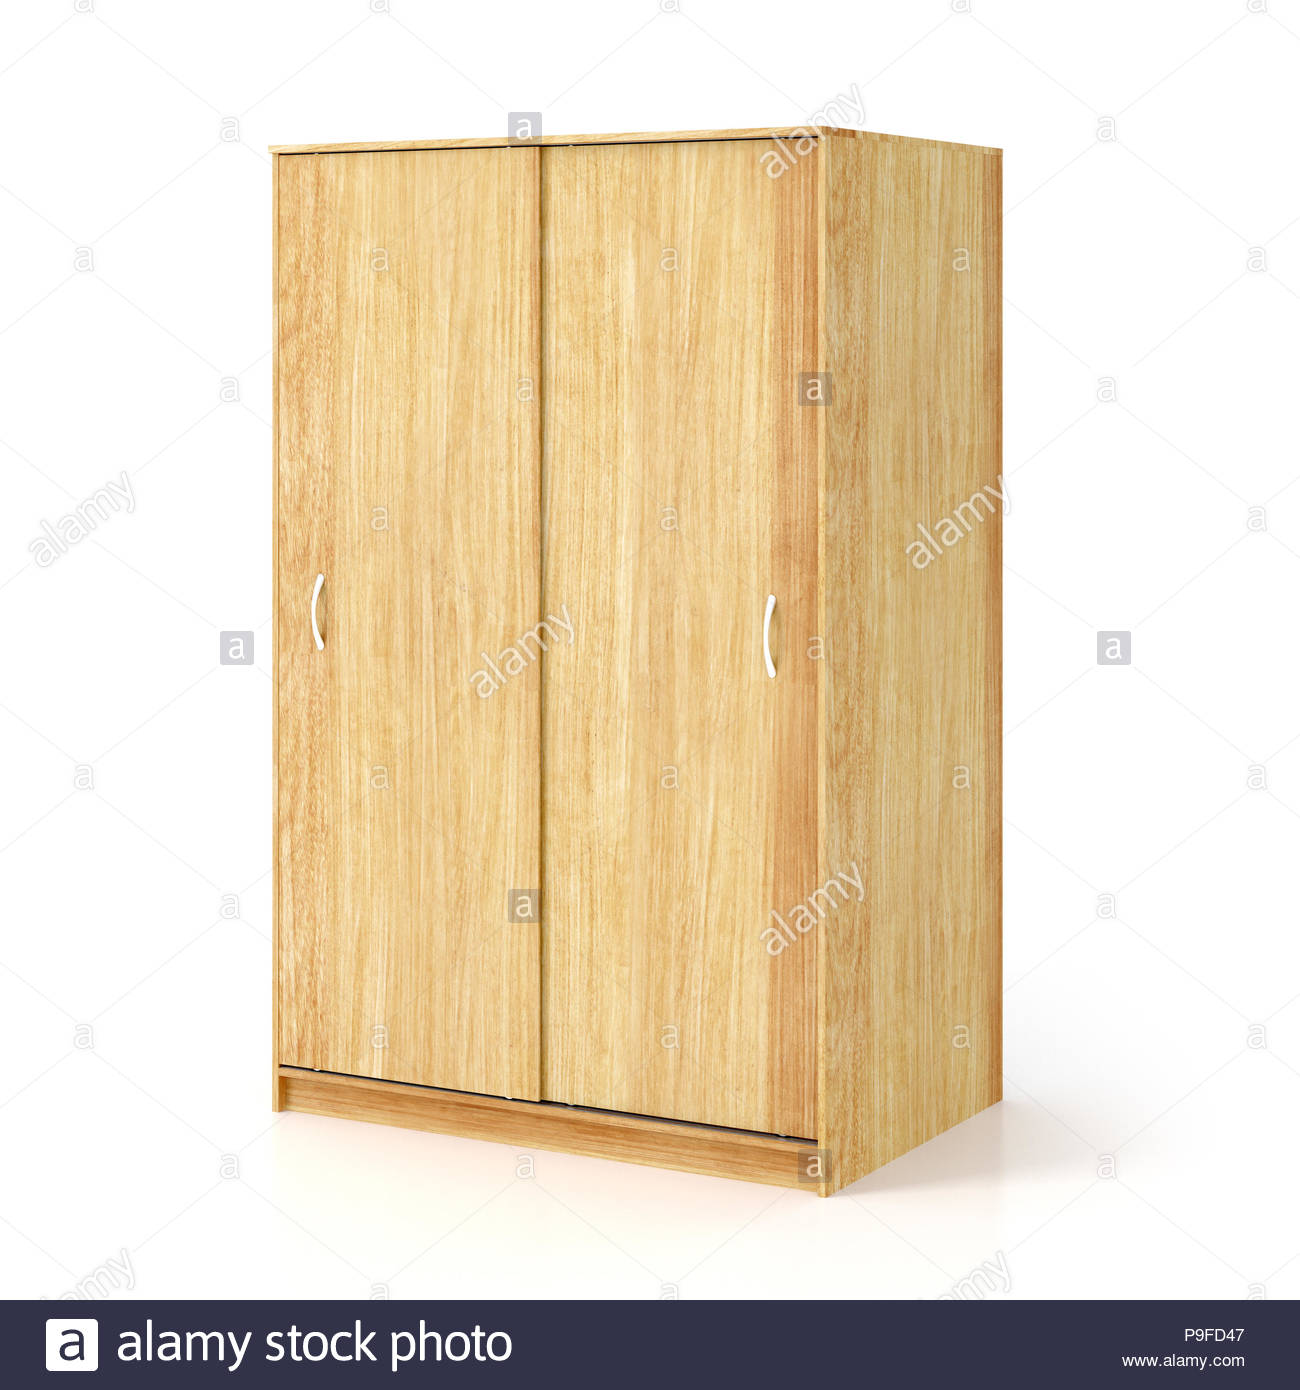 Wooden Wardrobe With Closed Sliding Doors Isolated On White